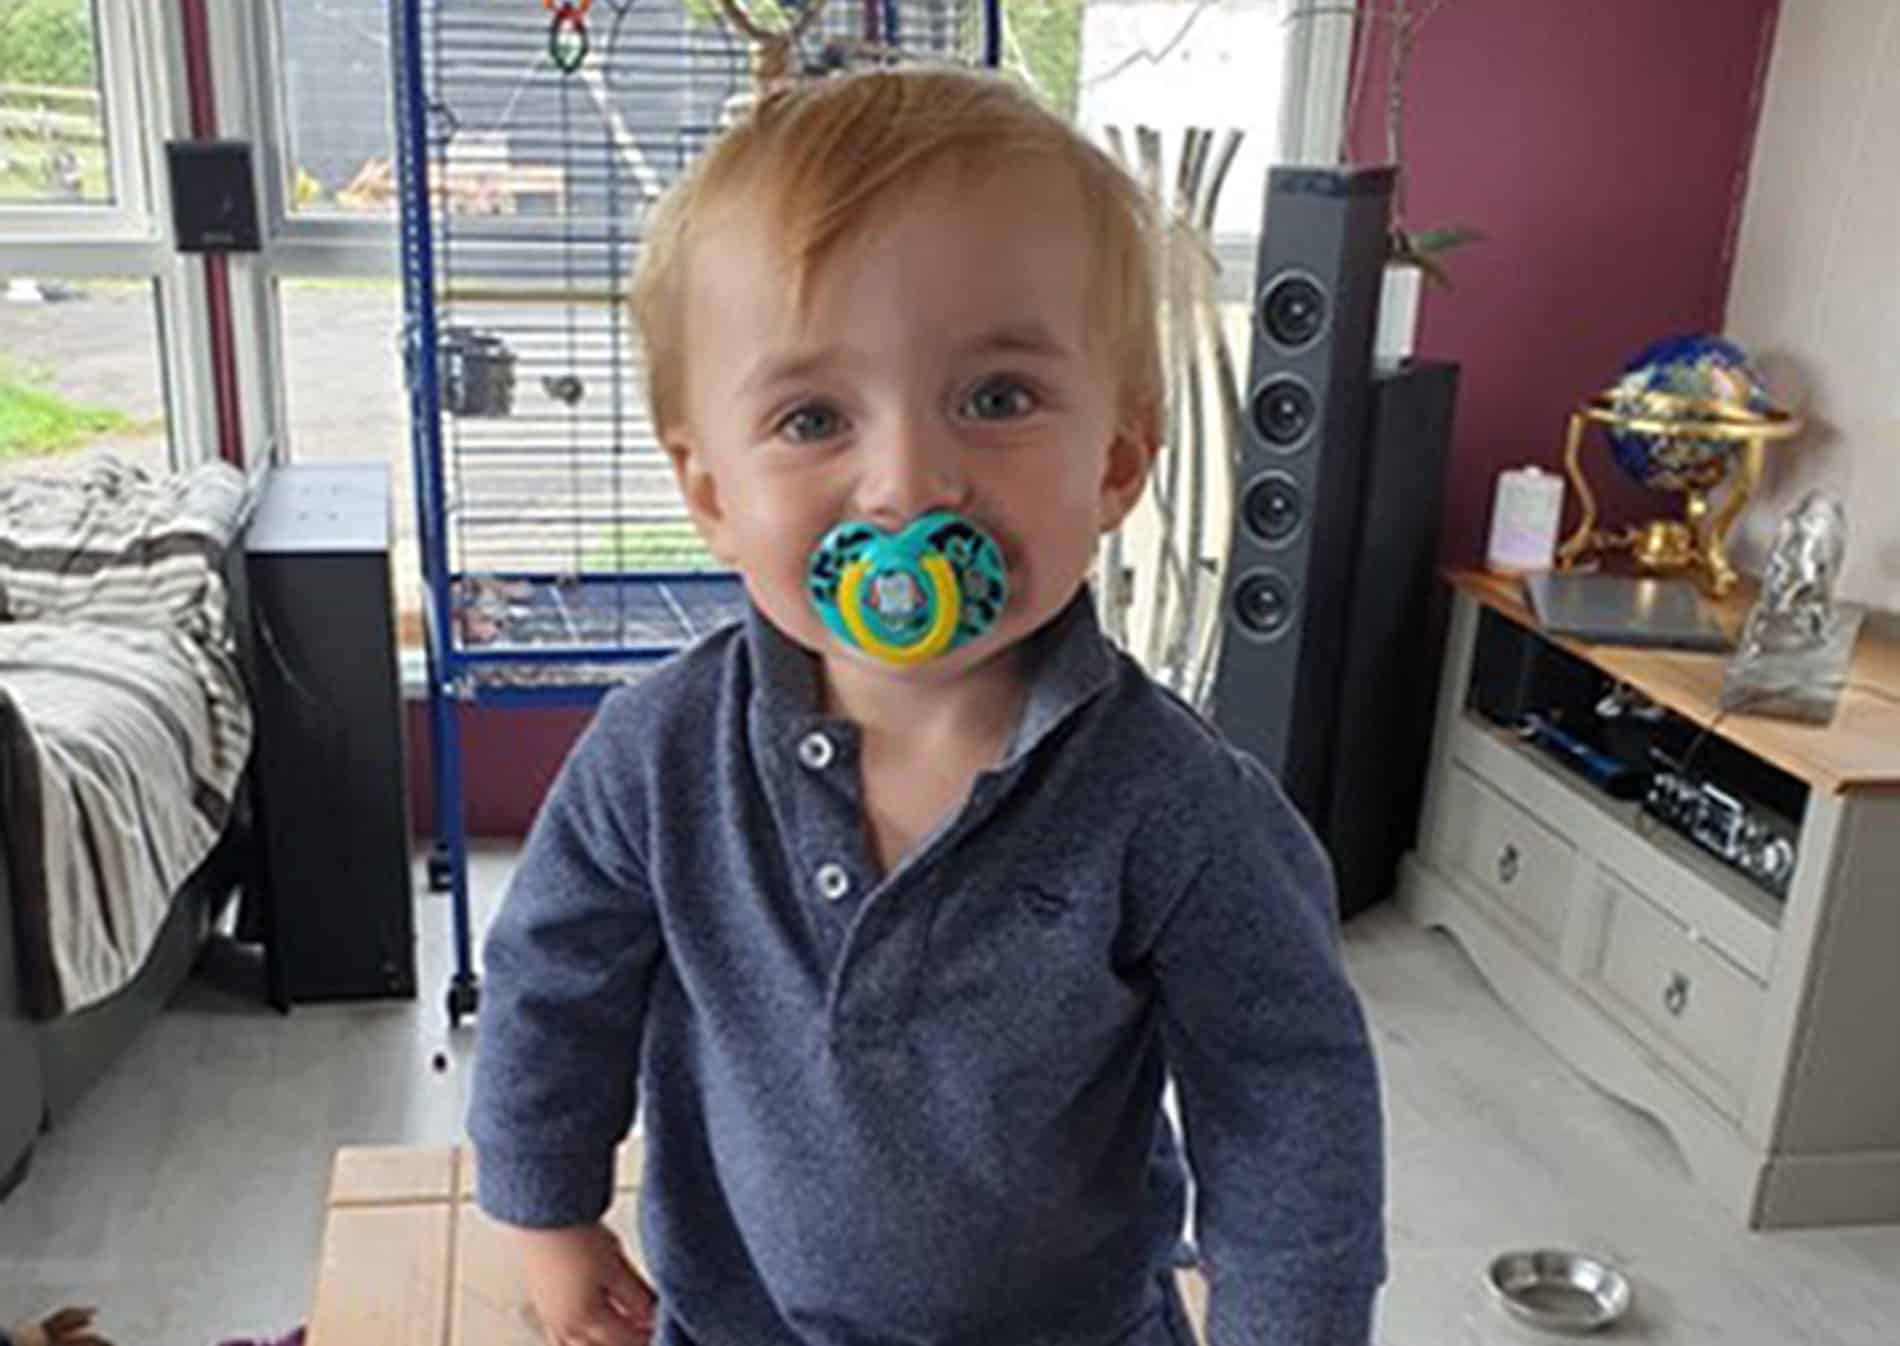 Mother and ex-boyfriend jailed for ‘cruel and brutal’ murder of 18-month-old son